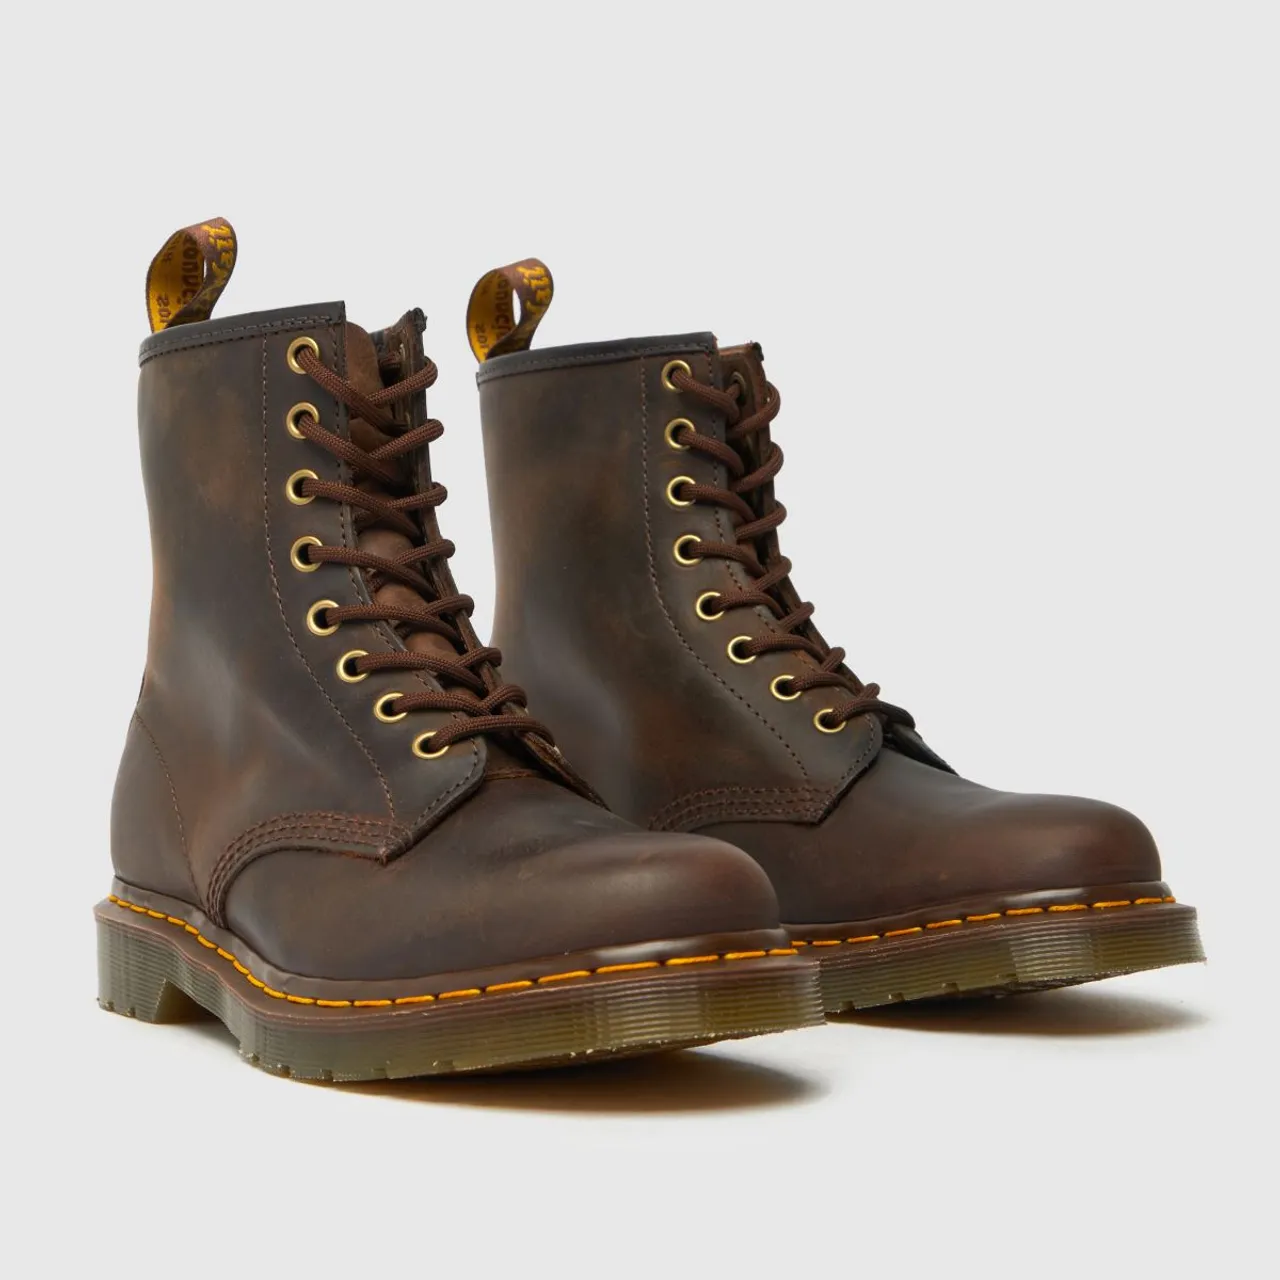 Dr Martens 1460 8 Eye Boots In Brown